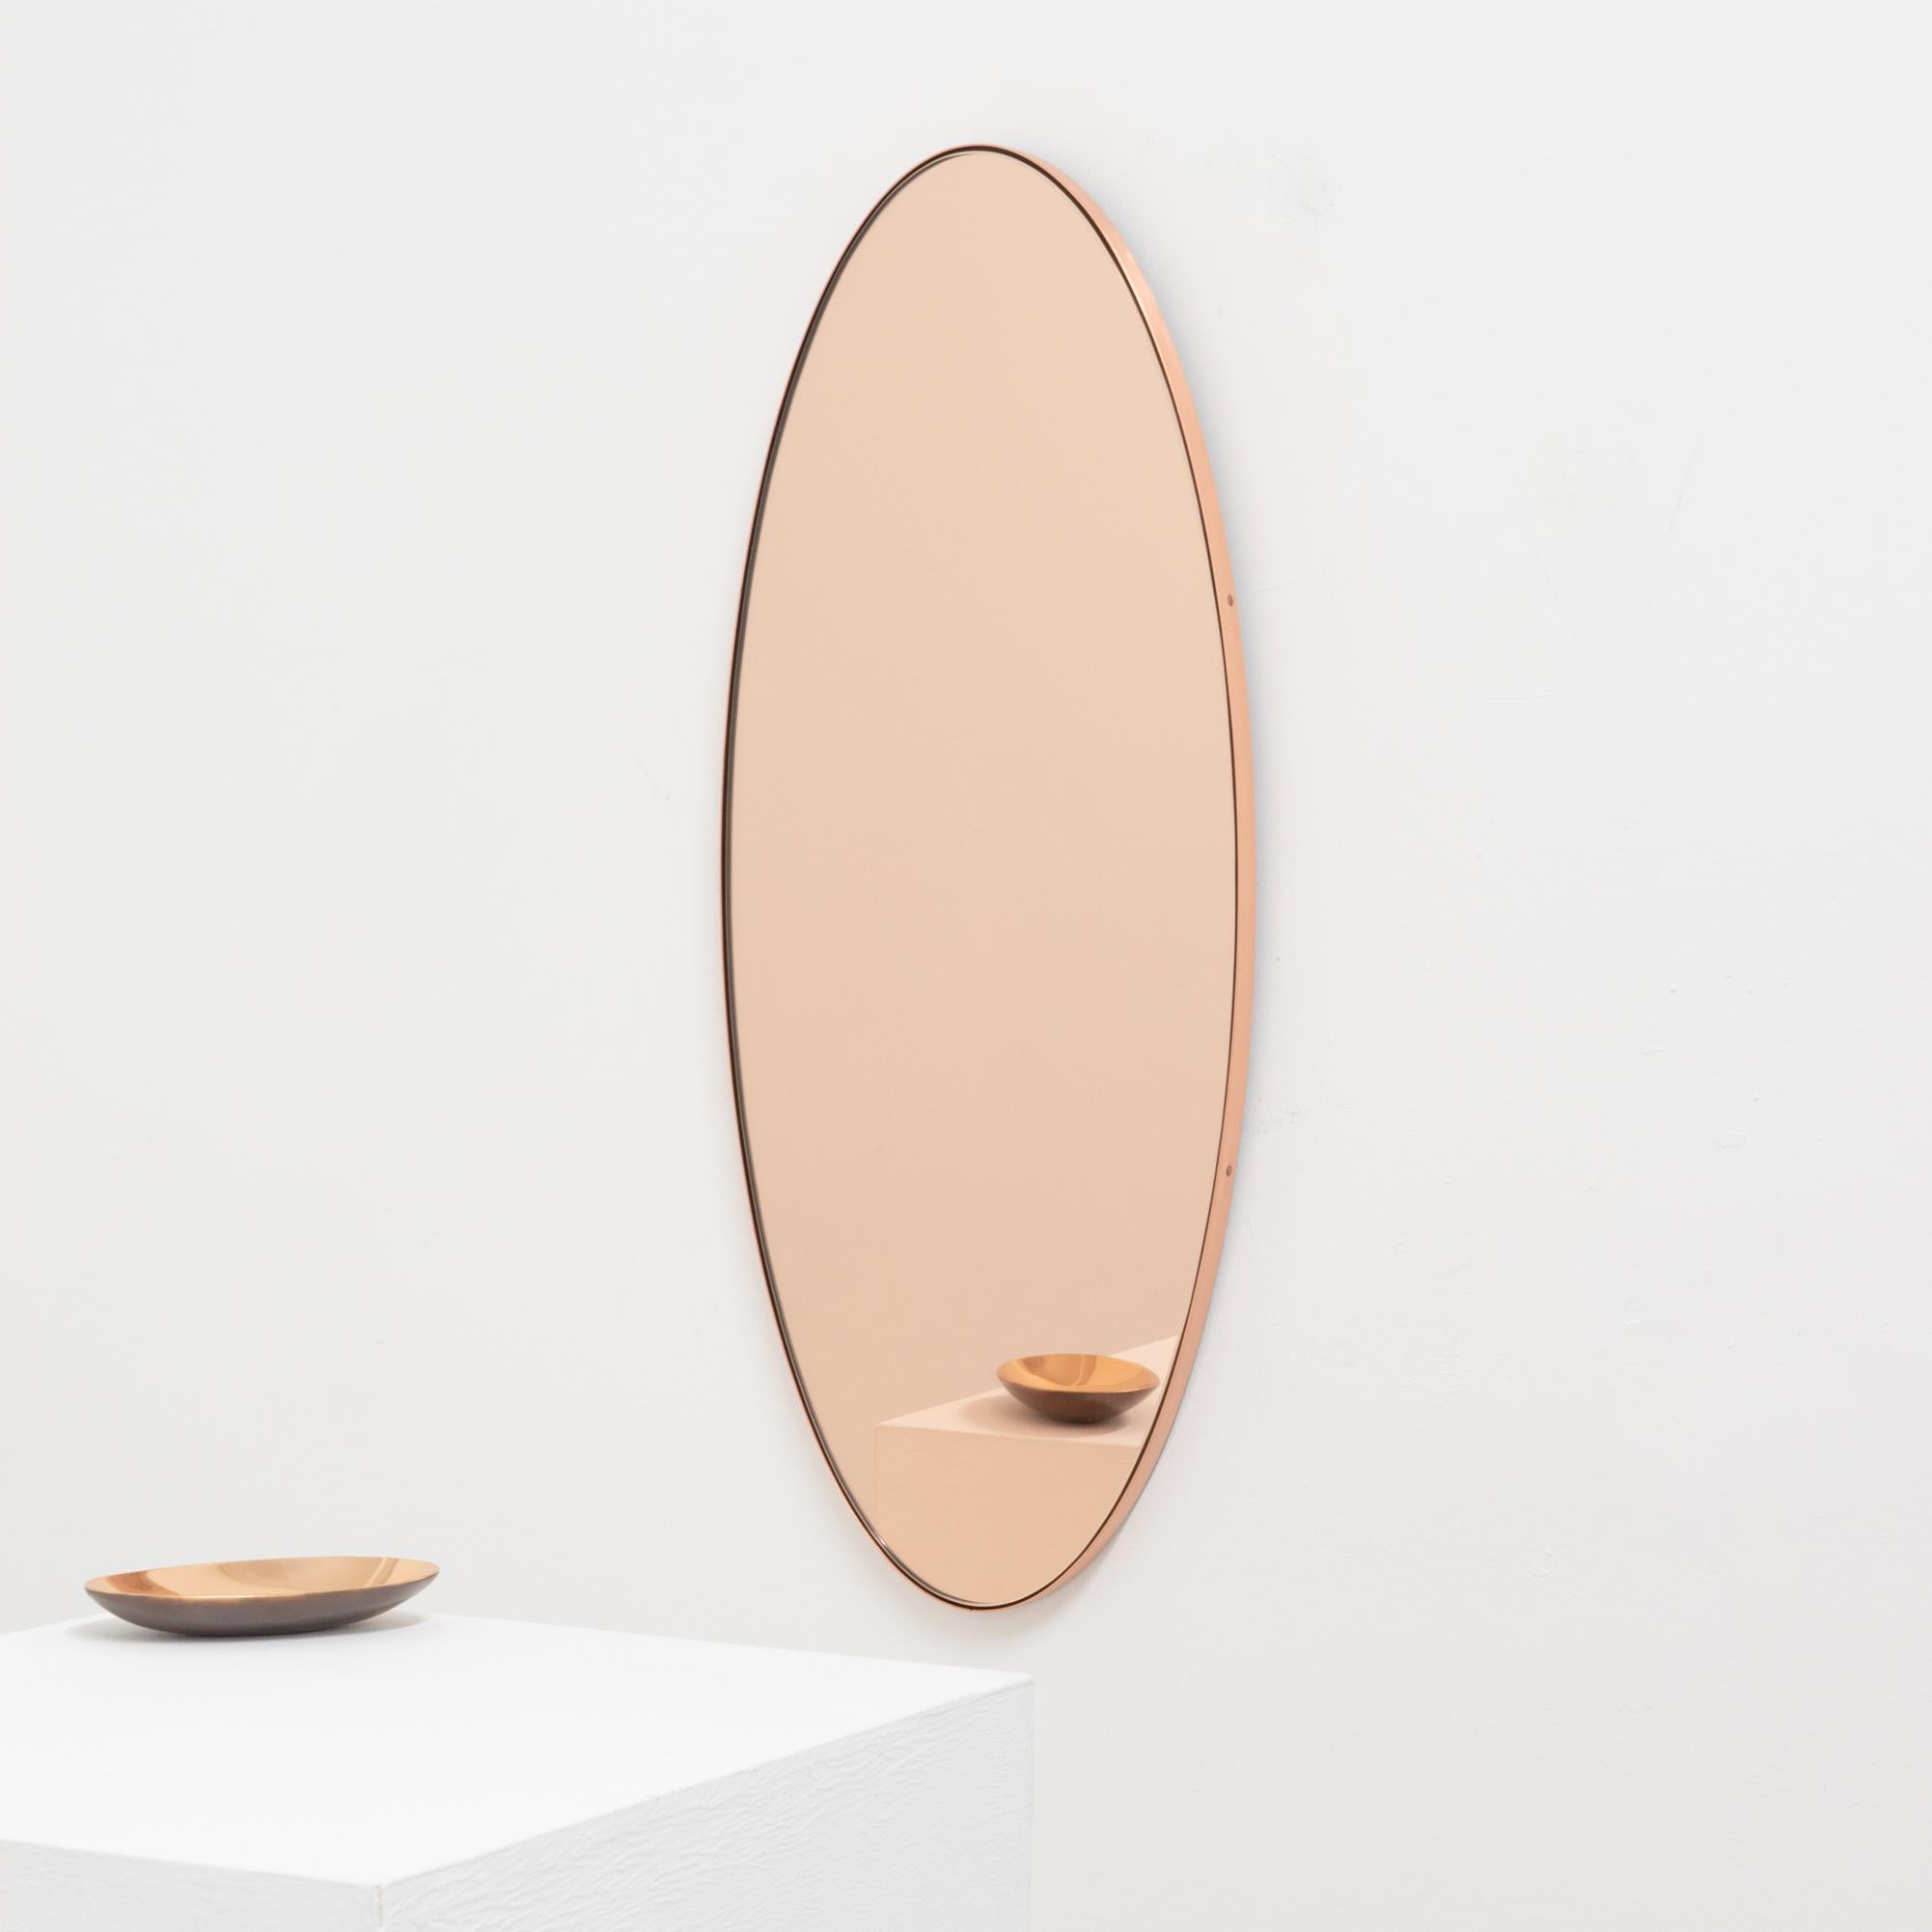 Ovalis Oval shaped Rose Gold Contemporary Mirror with a Copper Frame, Small For Sale 2